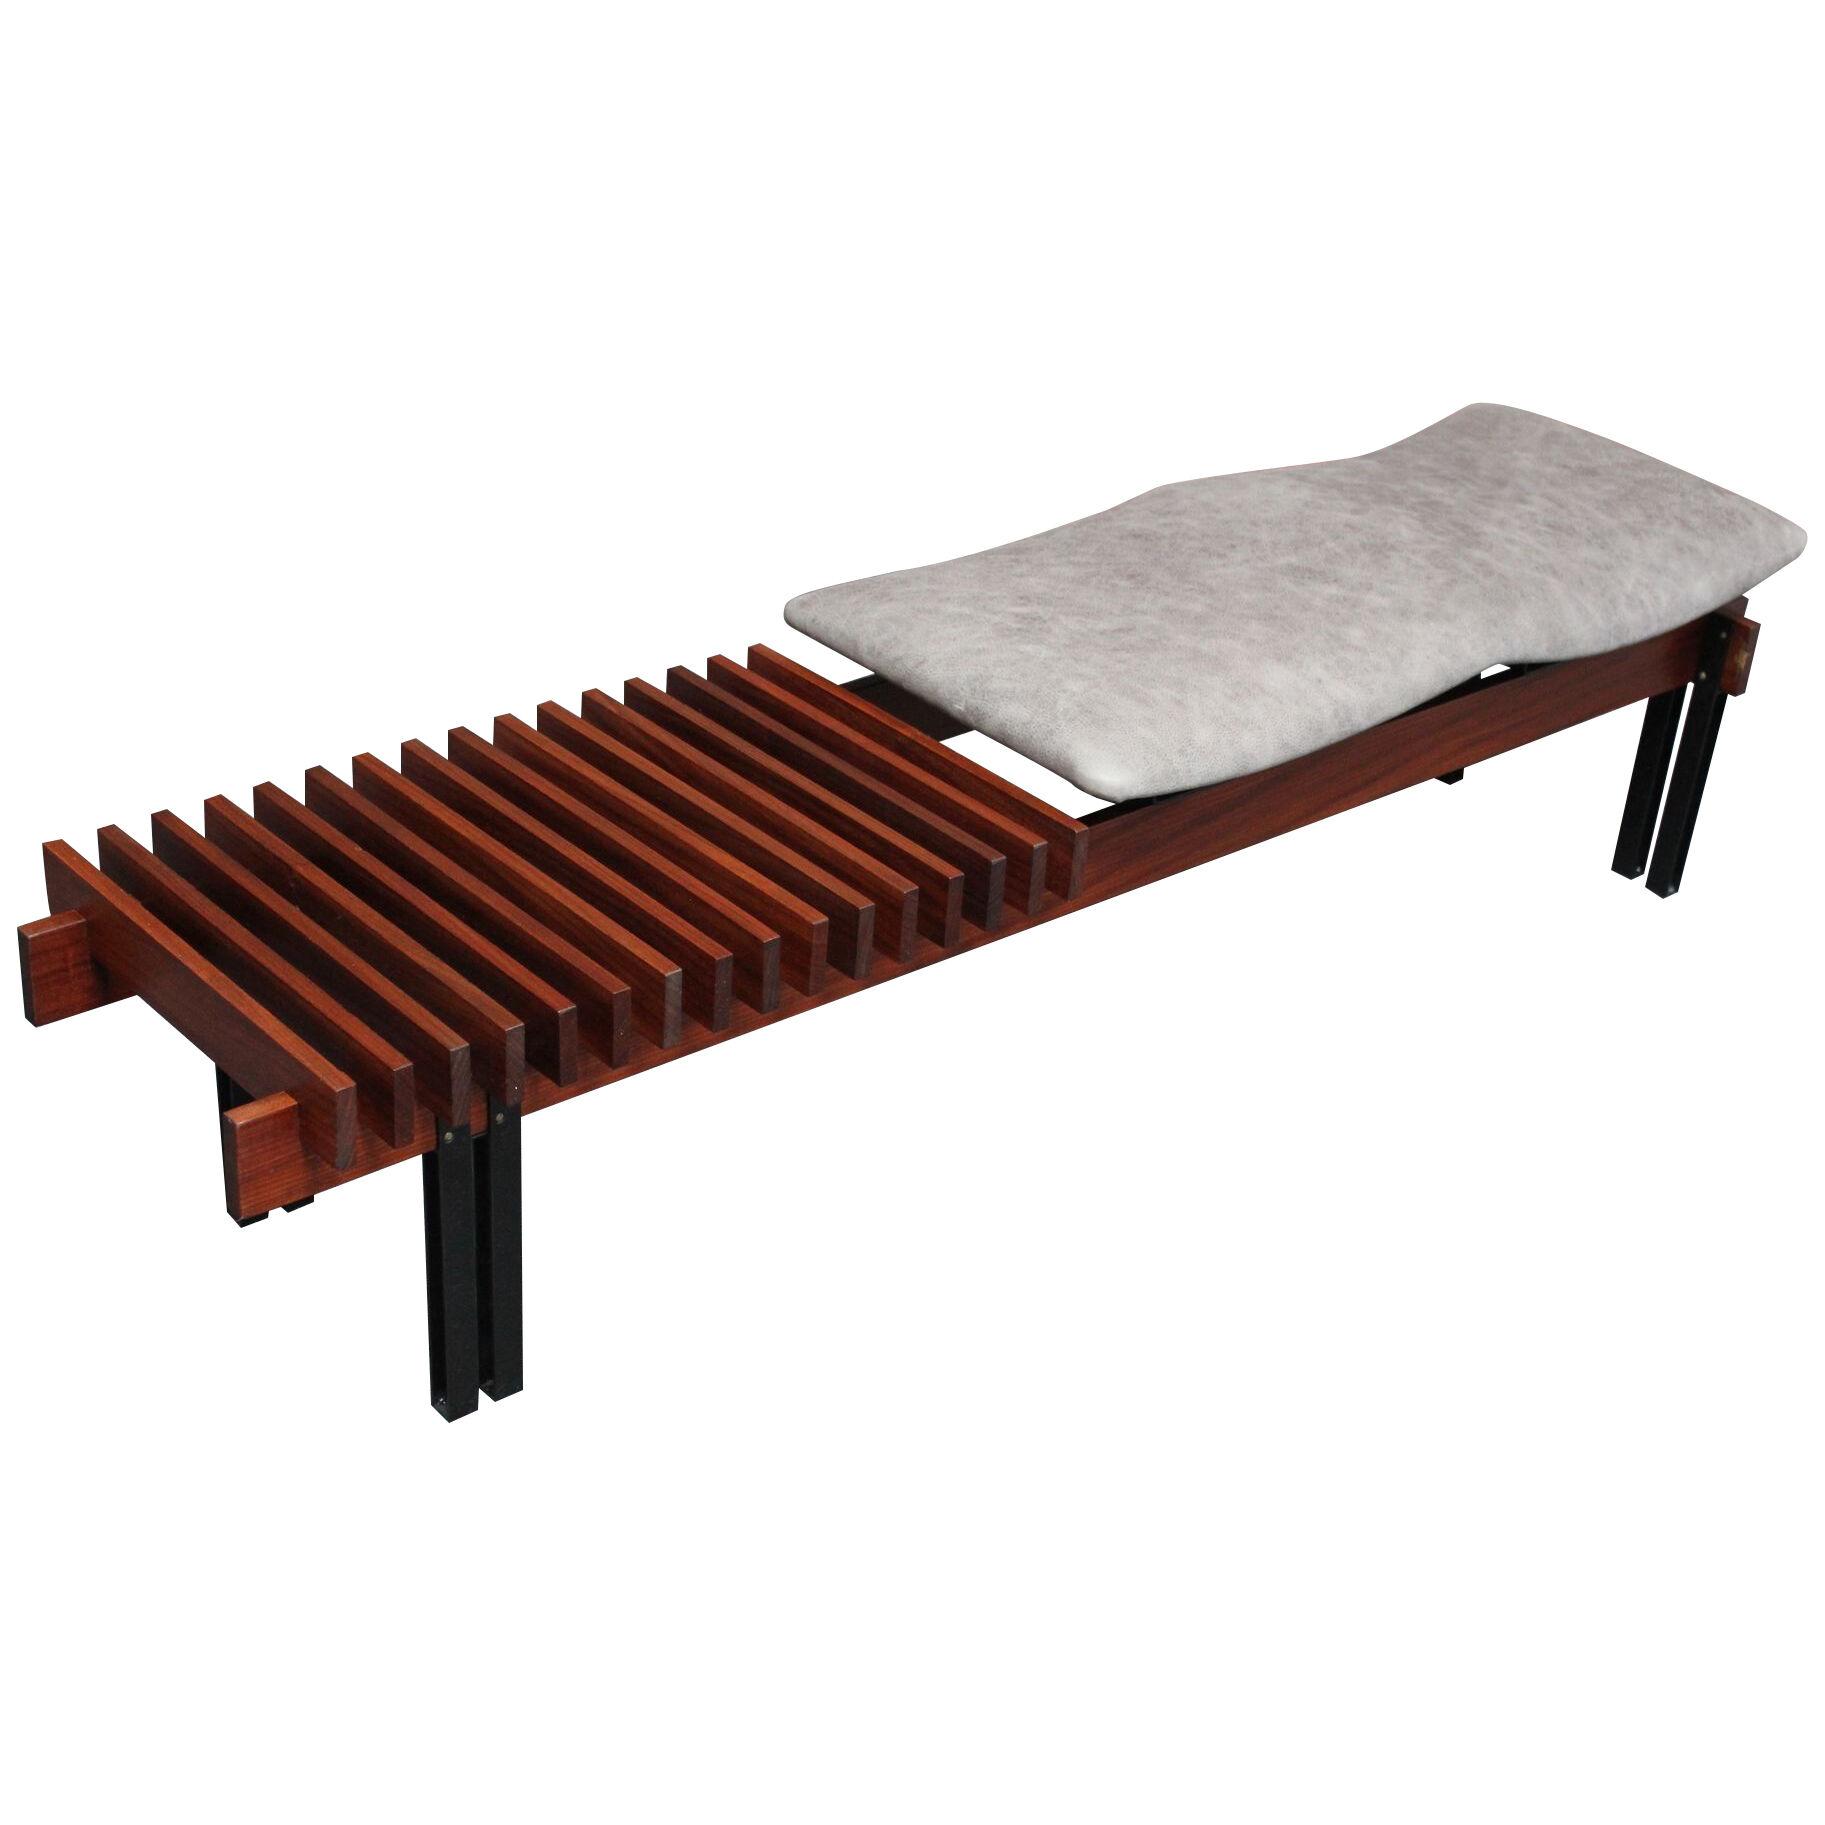 Italian Modernist Teak and Leather Bench by Inge and Luciano Rubino